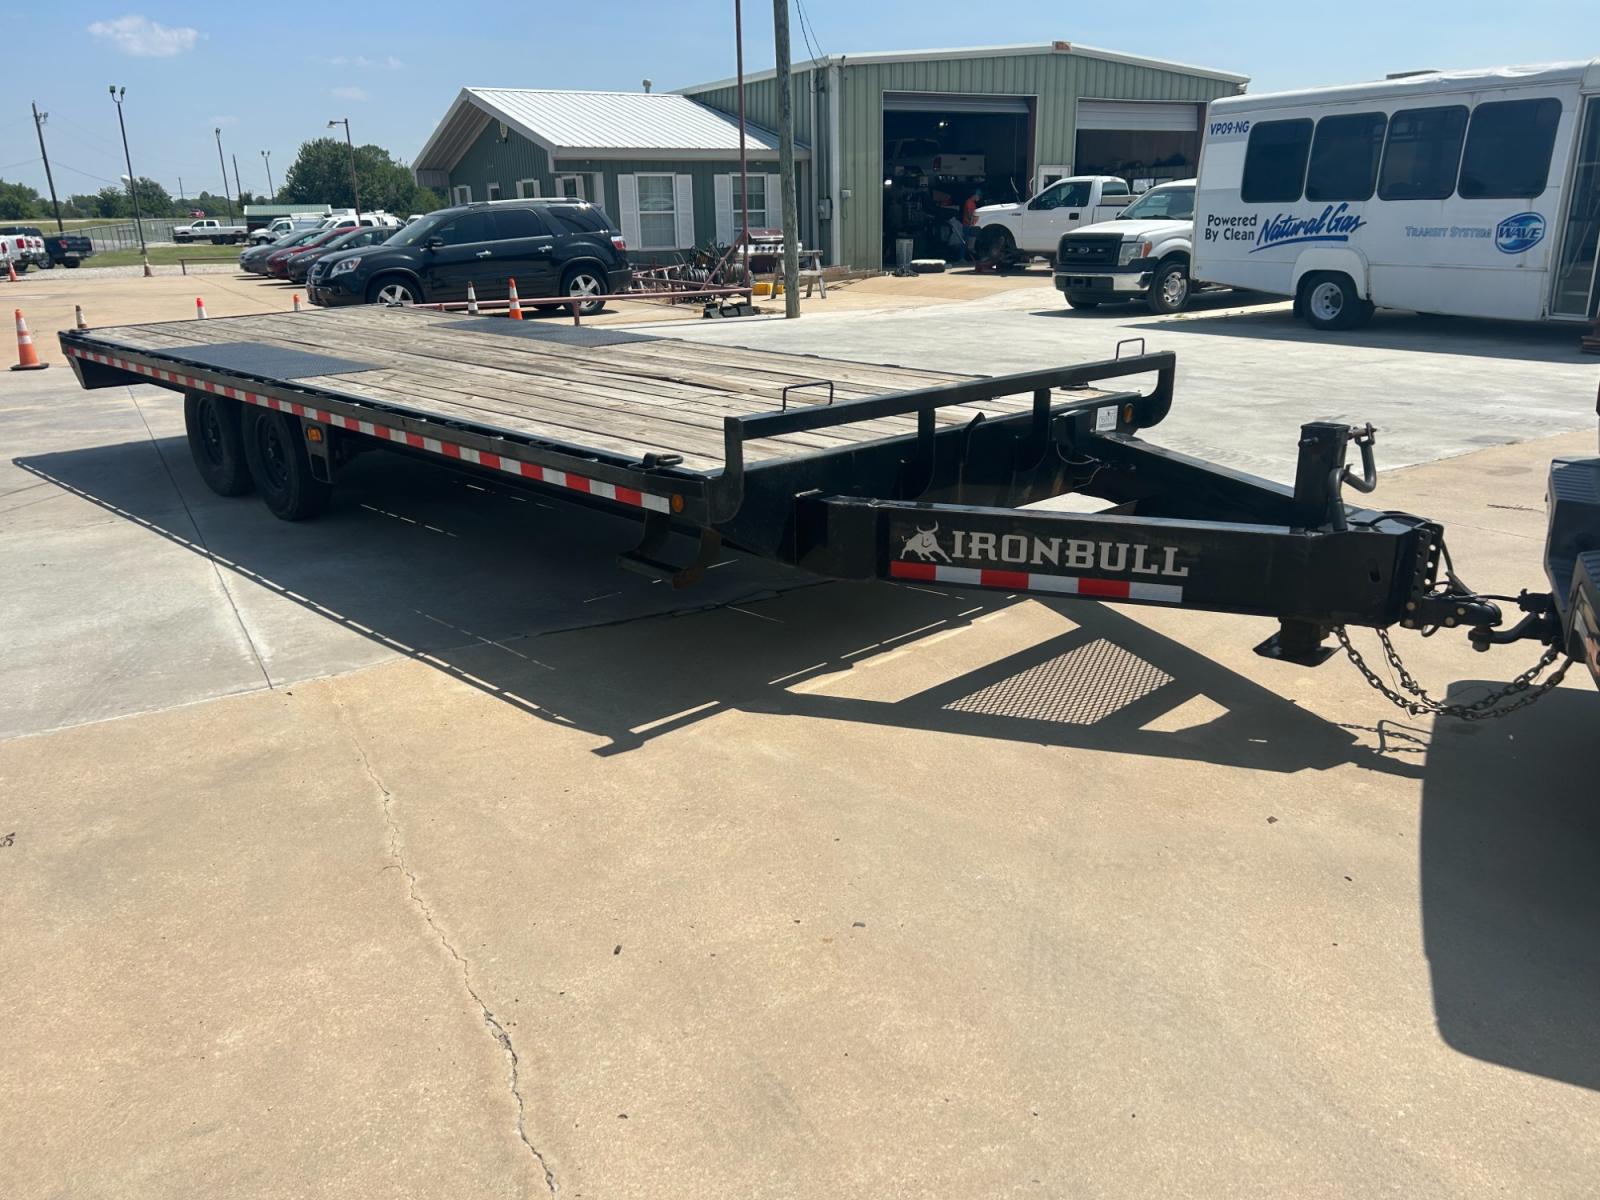 2022 BLACK Norstar Trailers IRONBULL (50HFP2426N1) , located at 17760 Hwy 62, Morris, OK, 74445, 35.609104, -95.877060 - 2022 IRONBULL TRAILER FEATURES 10" I-BEAM FRAME AND TONGUE, 2 5/16'' ADJUSTABLE COUPLER, 3'' STRUCTURAL CROSSMEMBERS, DECK HEIGHT 33'', RUB RAIL, STAKE POCKETS, PIPE SPOOLS, CAMBERED SPRING AXLES, MULTI-LEAF SLIPPER SPRING SUSPENSION, E-Z LUBE HUBS, 2 ELECTRIC BREAK AXLES, FULL 93' WIDE DECKOVER, 8 - Photo #1